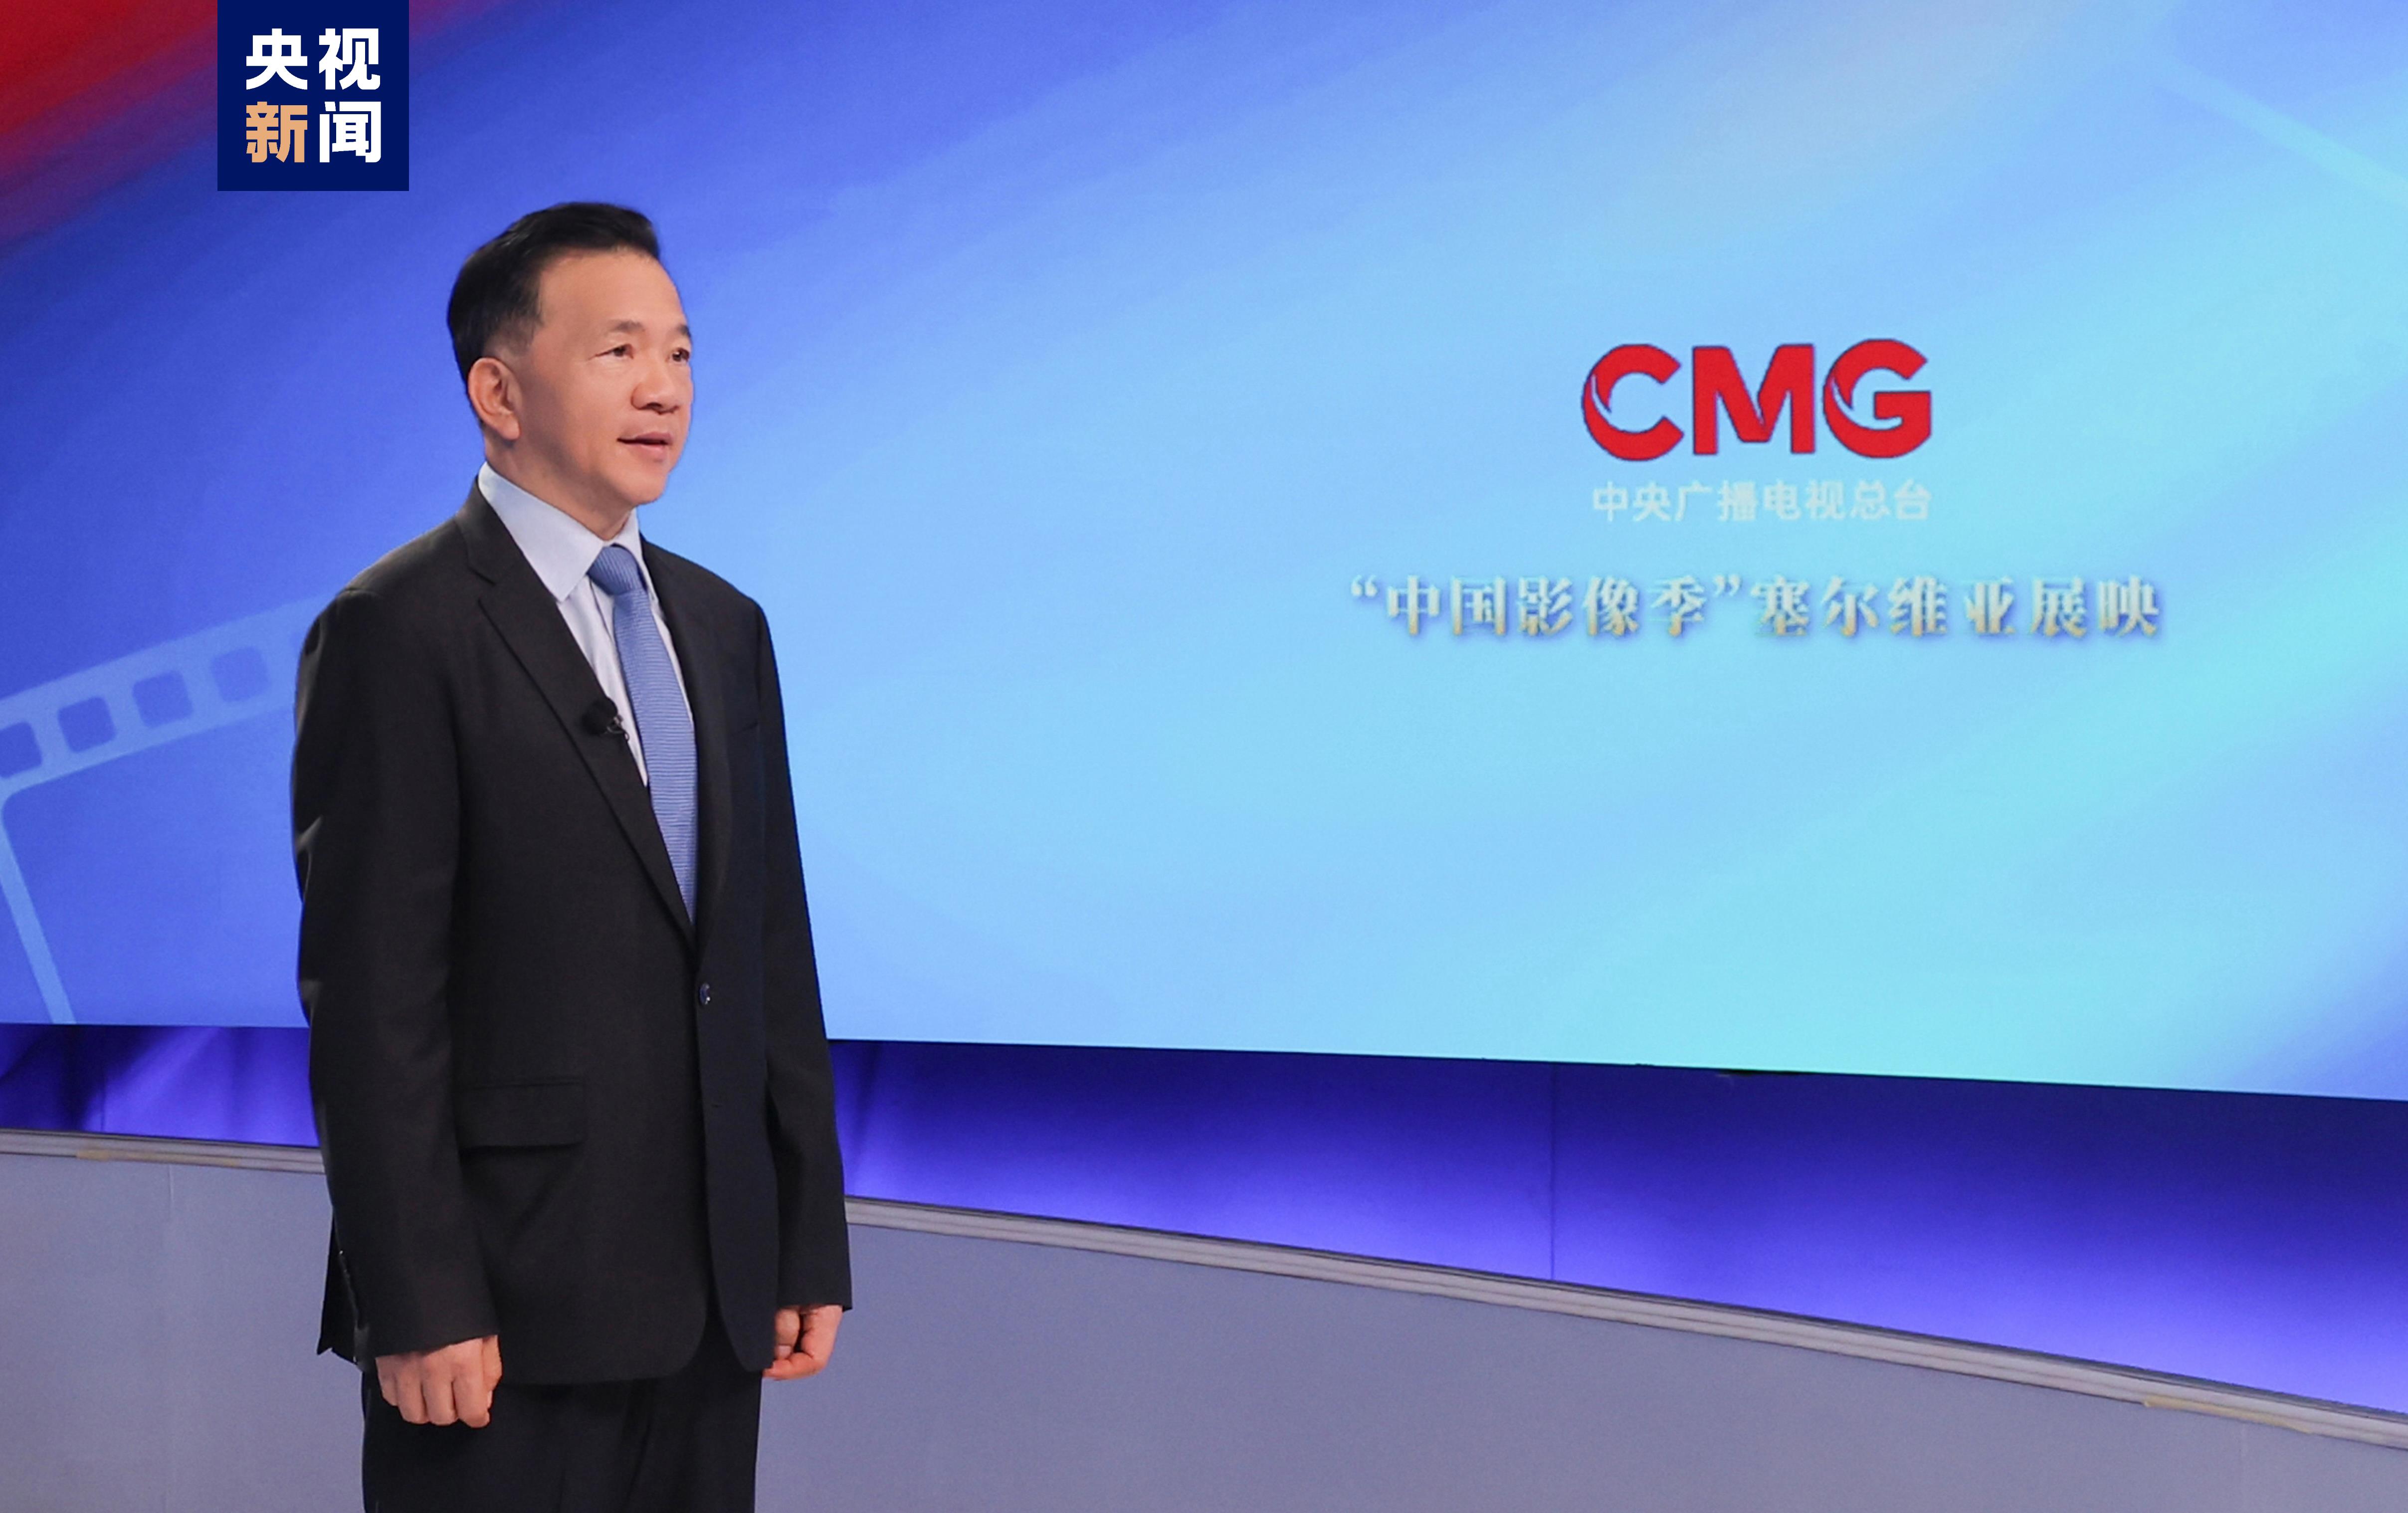 Shen Haixiong, vice minister of the Publicity Department of the Communist Party of China Central Committee and president of CMG. /CMG